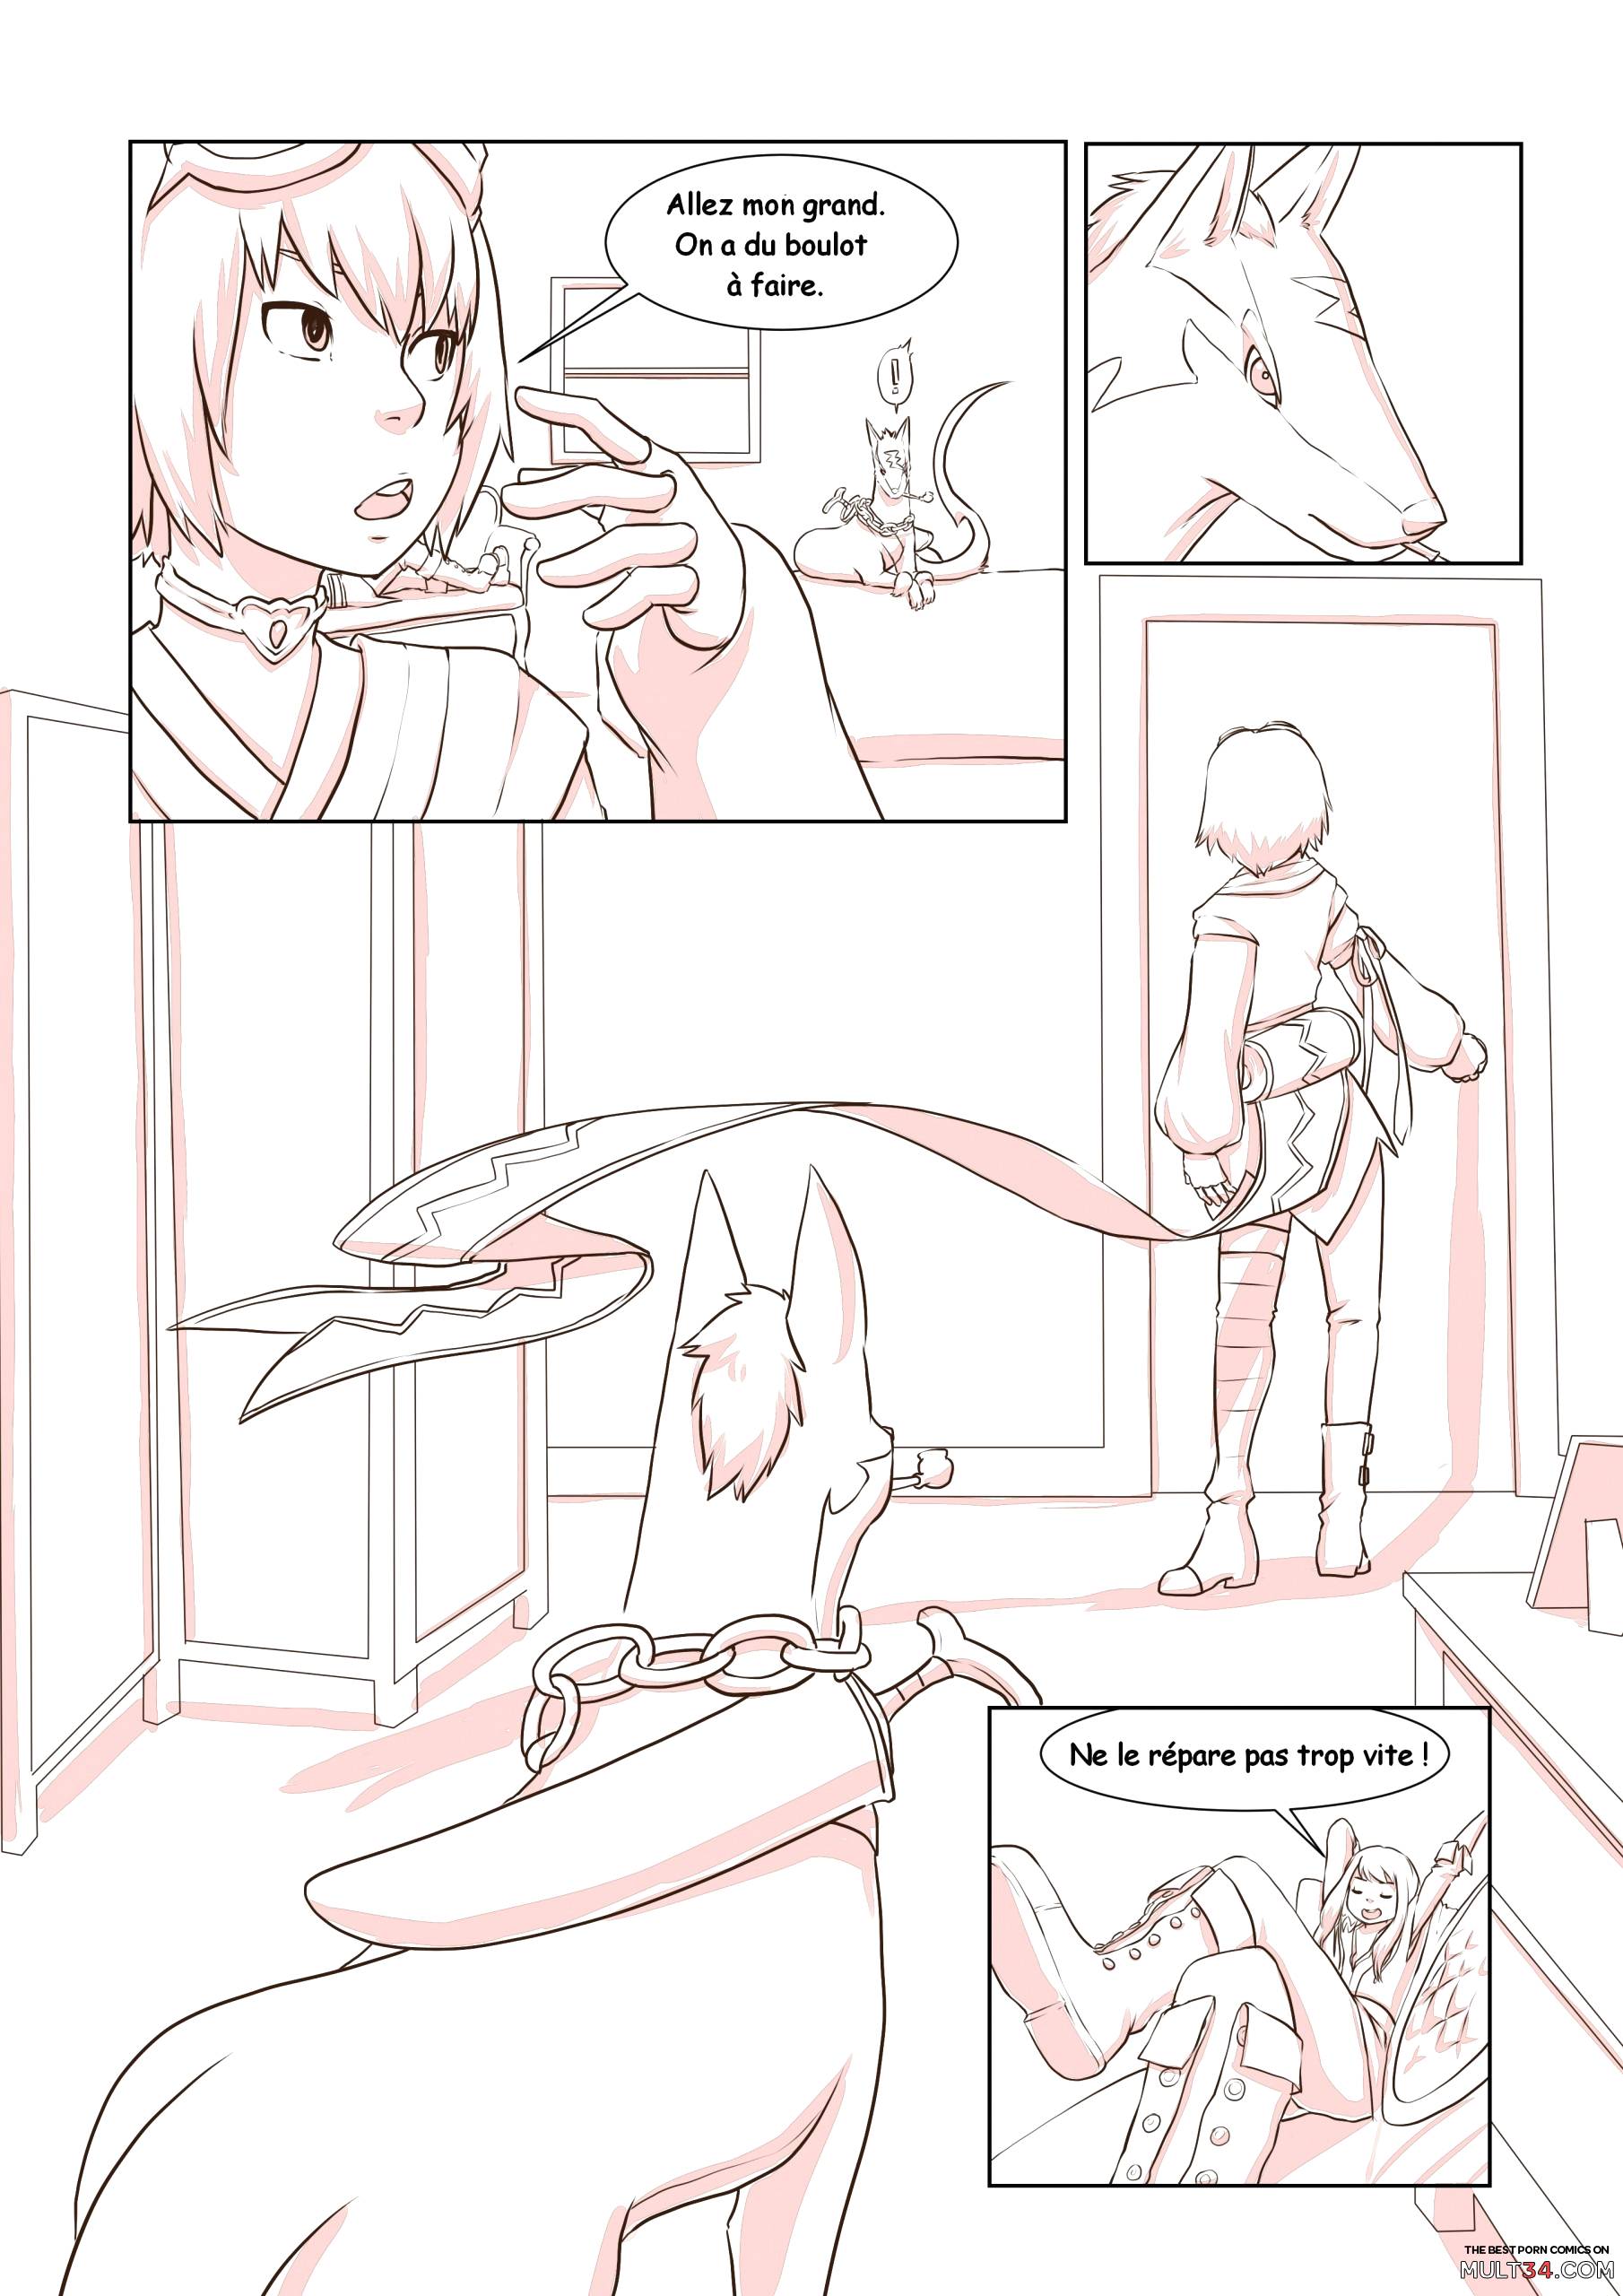 Tales of Rita and Repede - Episode 1 page 4